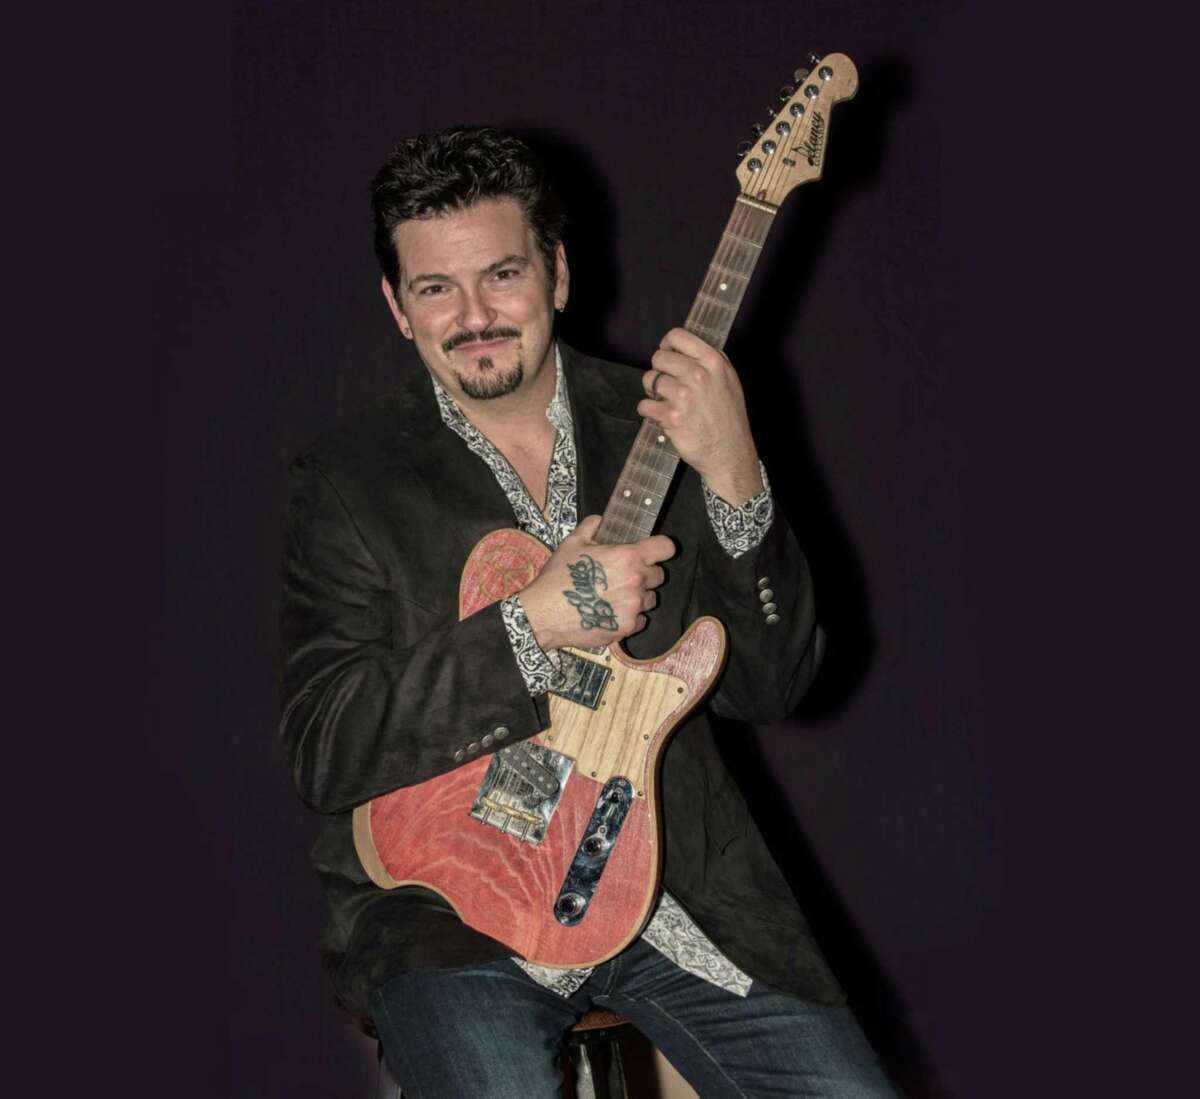 Rocker Mike Zito will make a stop on his tour for his new album, a tribute to Chuck Berry, at Infinity Music Hall on Dec. 11.